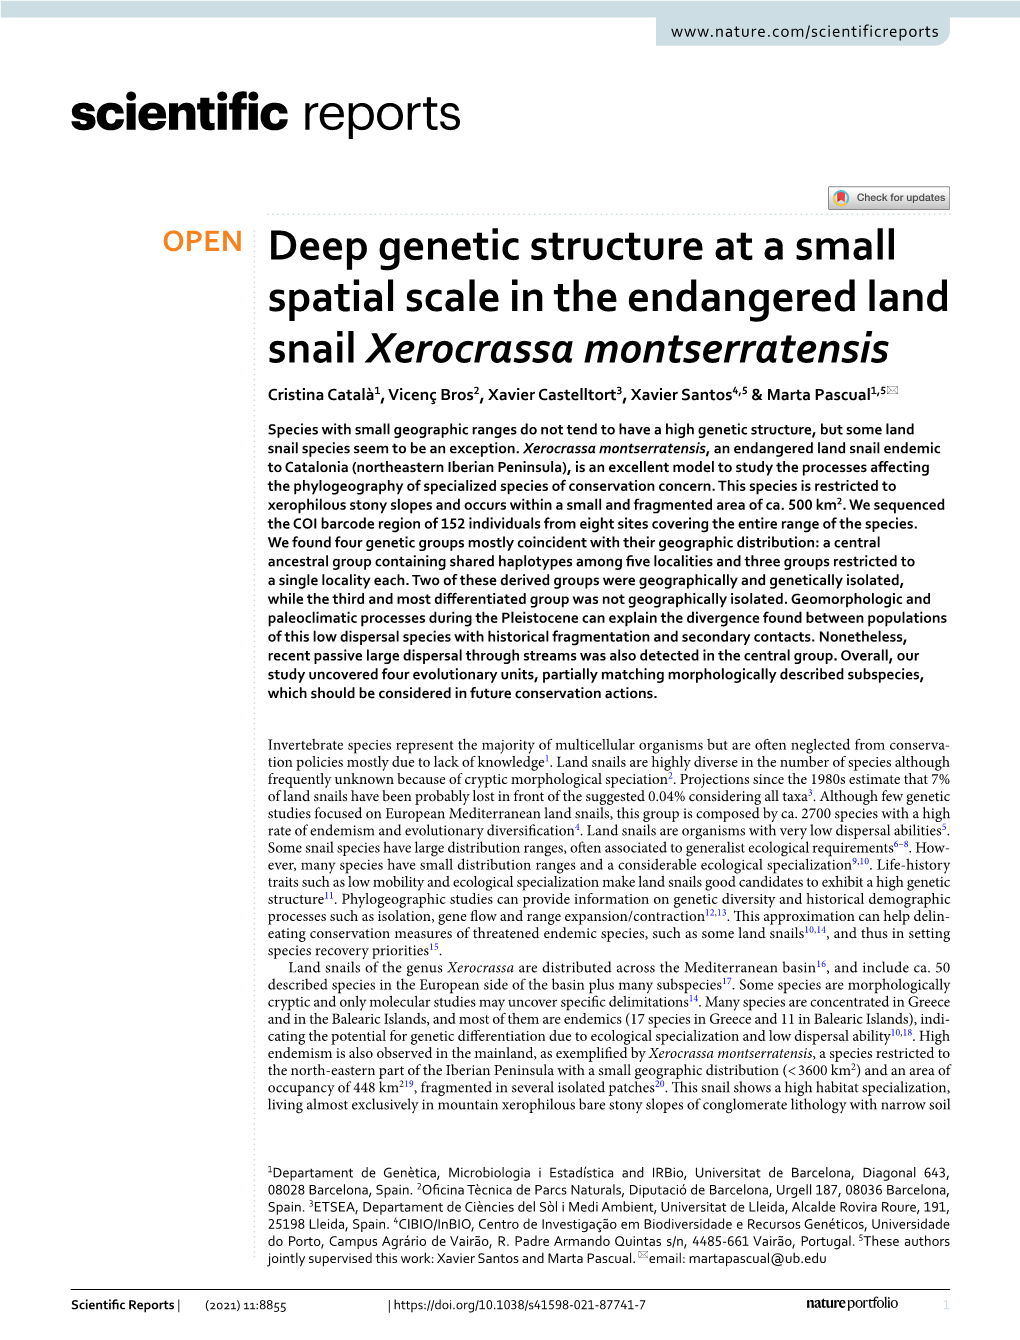 Deep Genetic Structure at a Small Spatial Scale in the Endangered